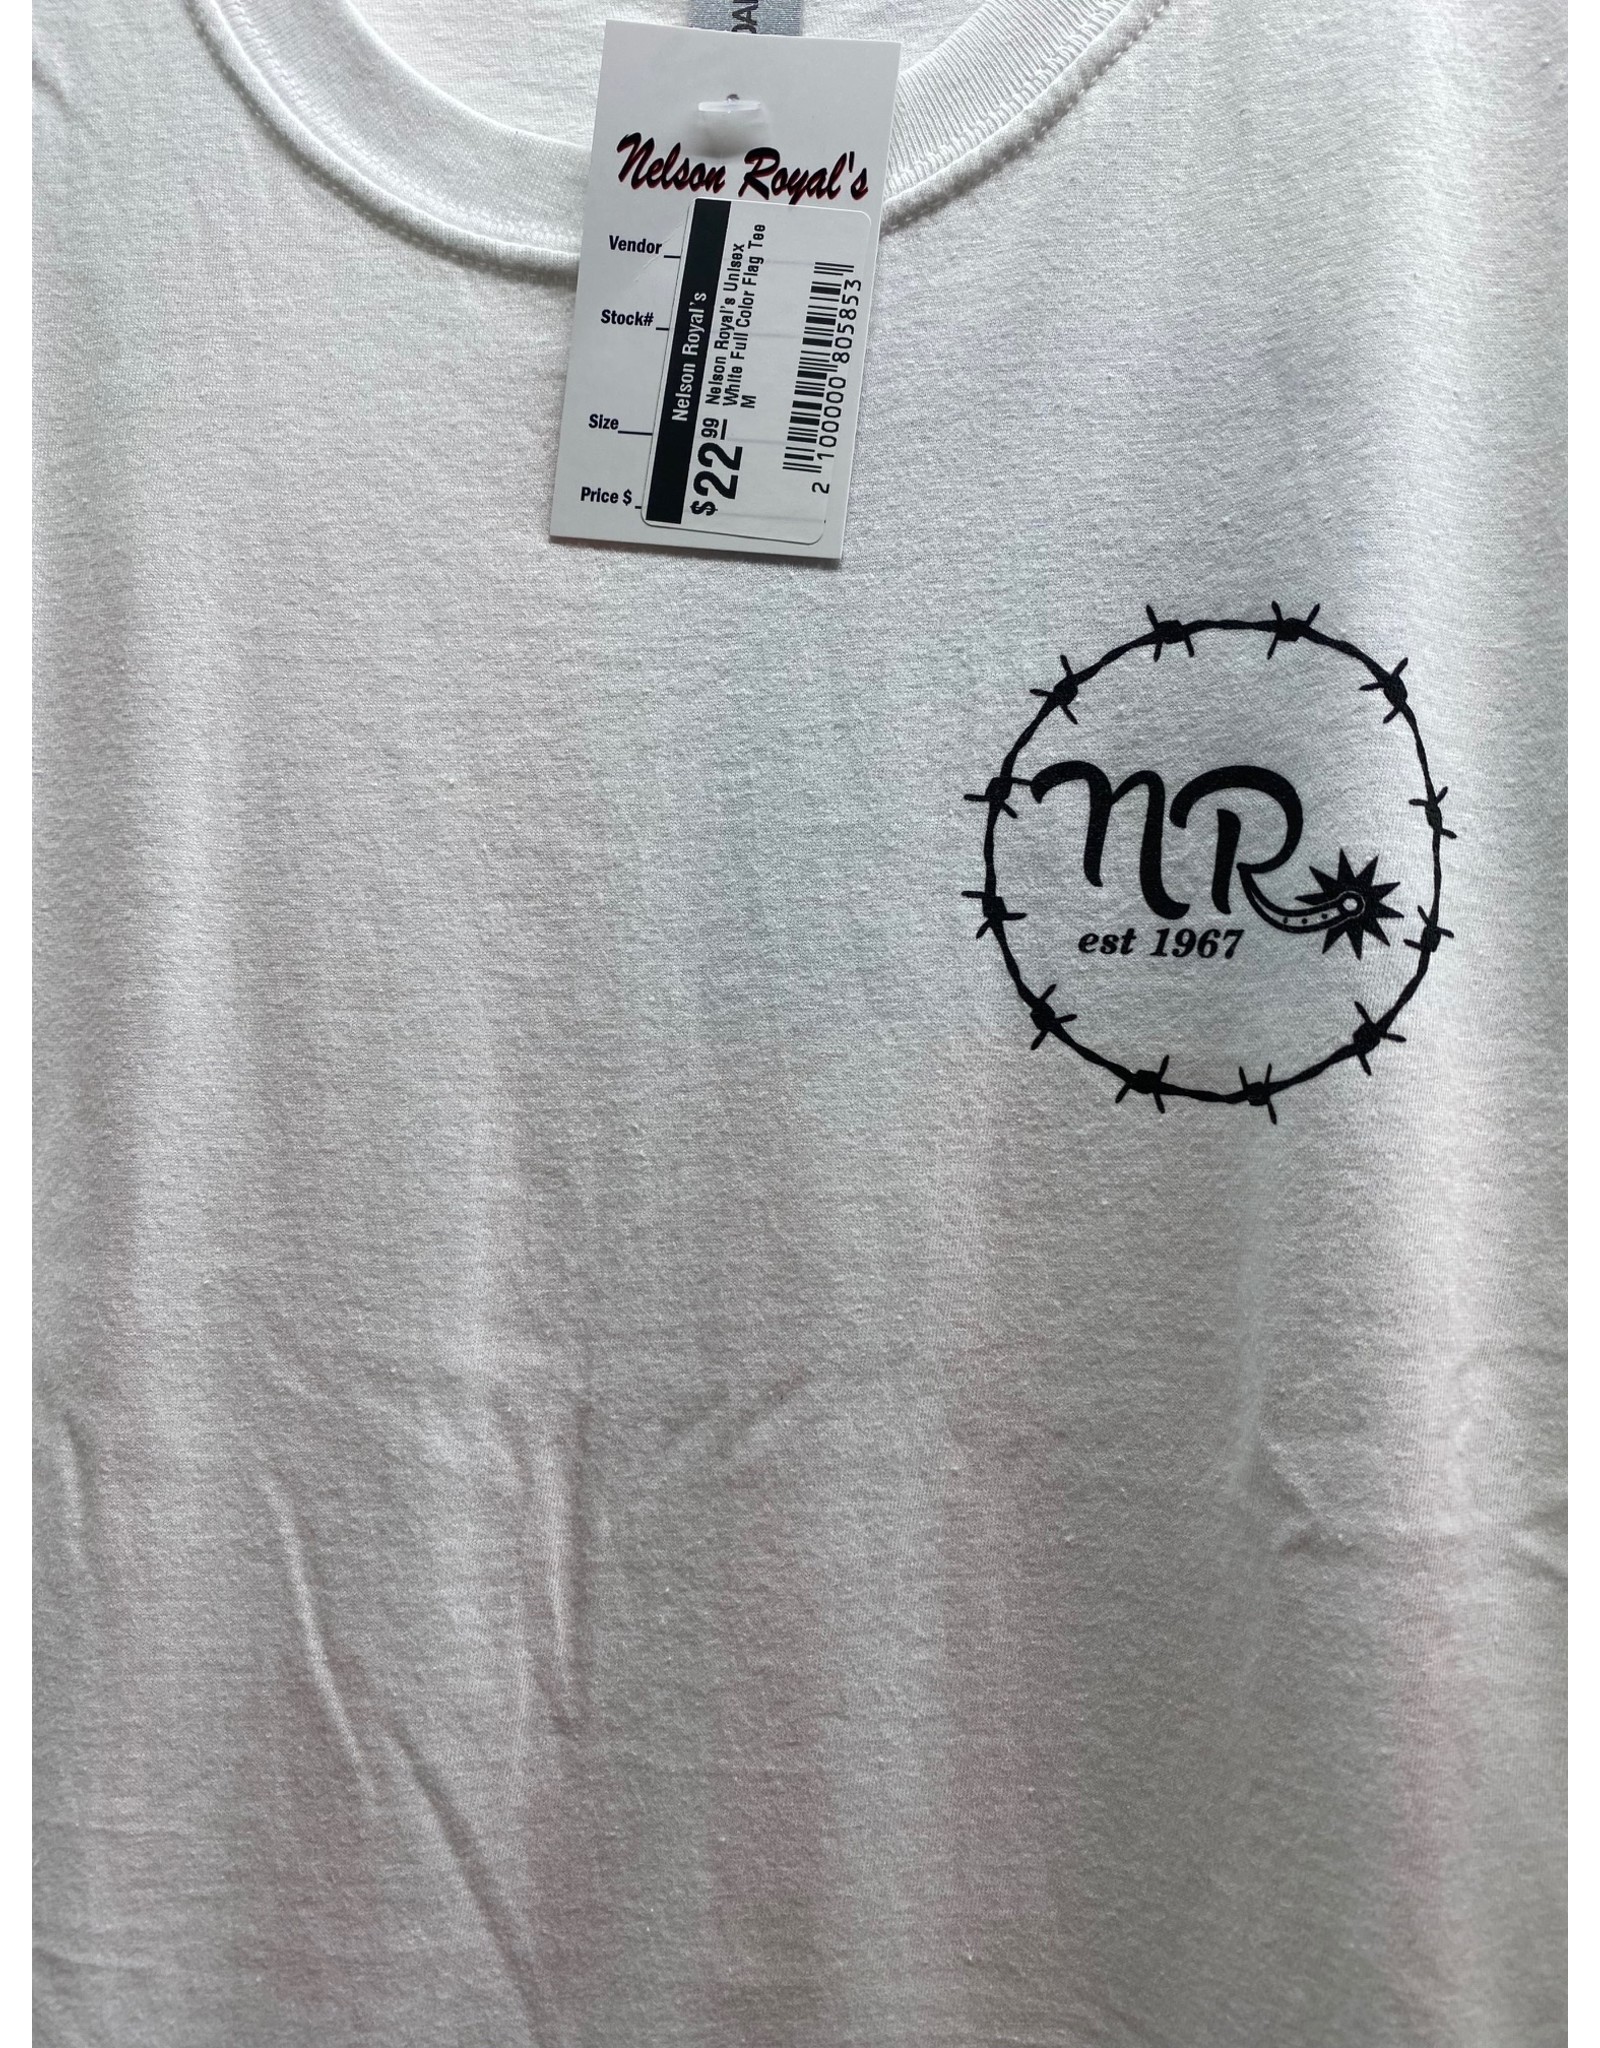 Nelson Royal's Unisex White Full Color or Greyscale Flag Tee